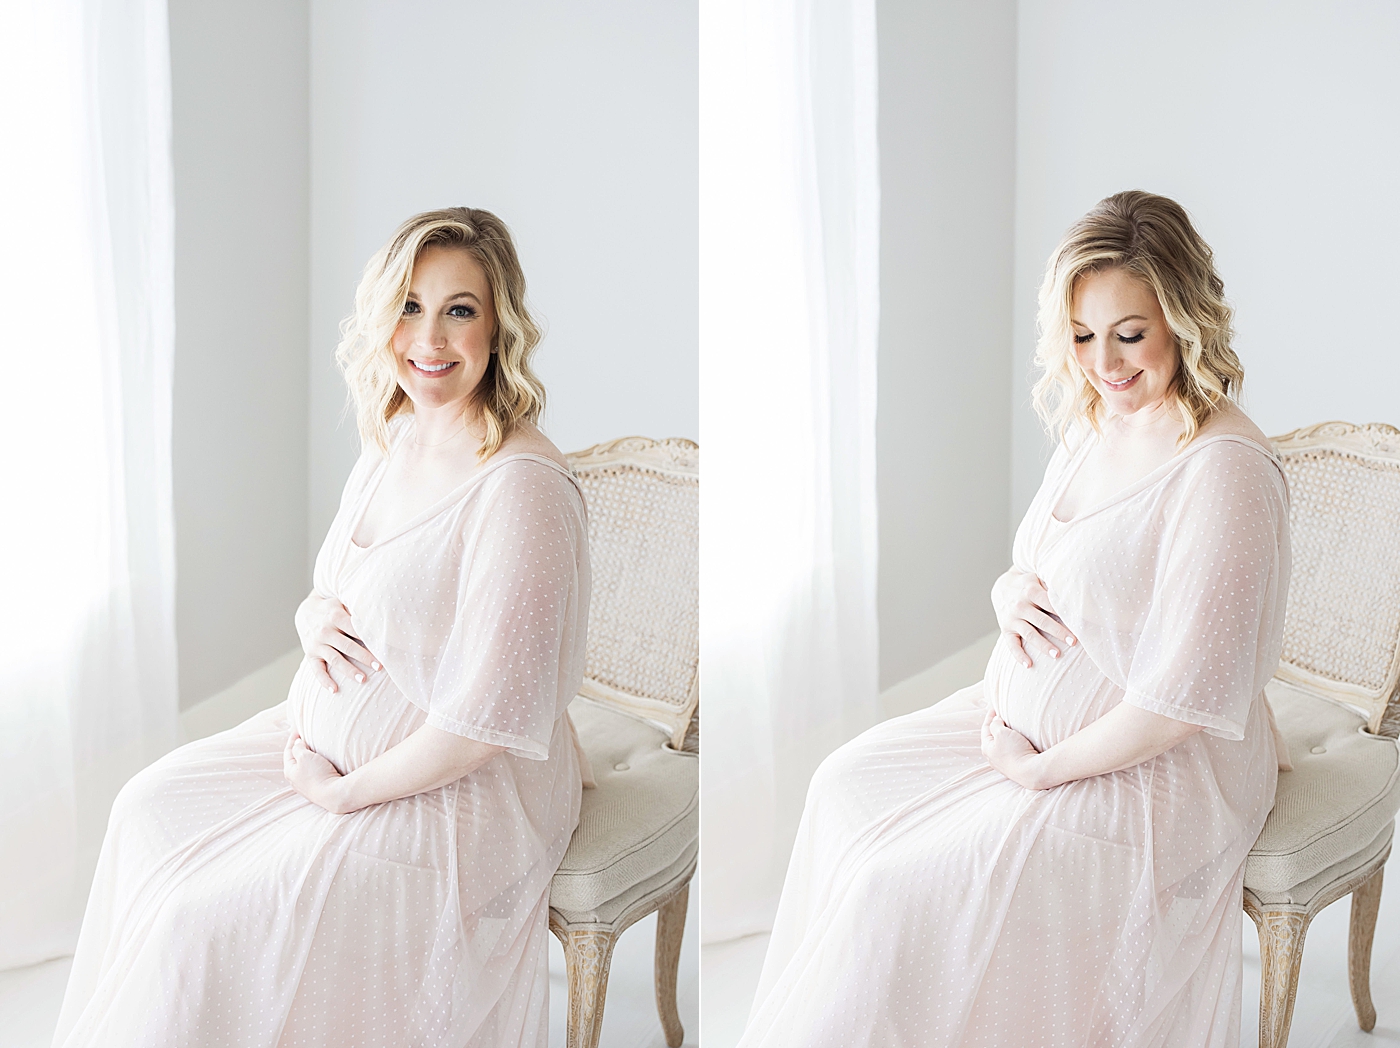 Pregnant mom sitting in chair wearing Swiss dot dress. Photo by Fresh Light Photography.